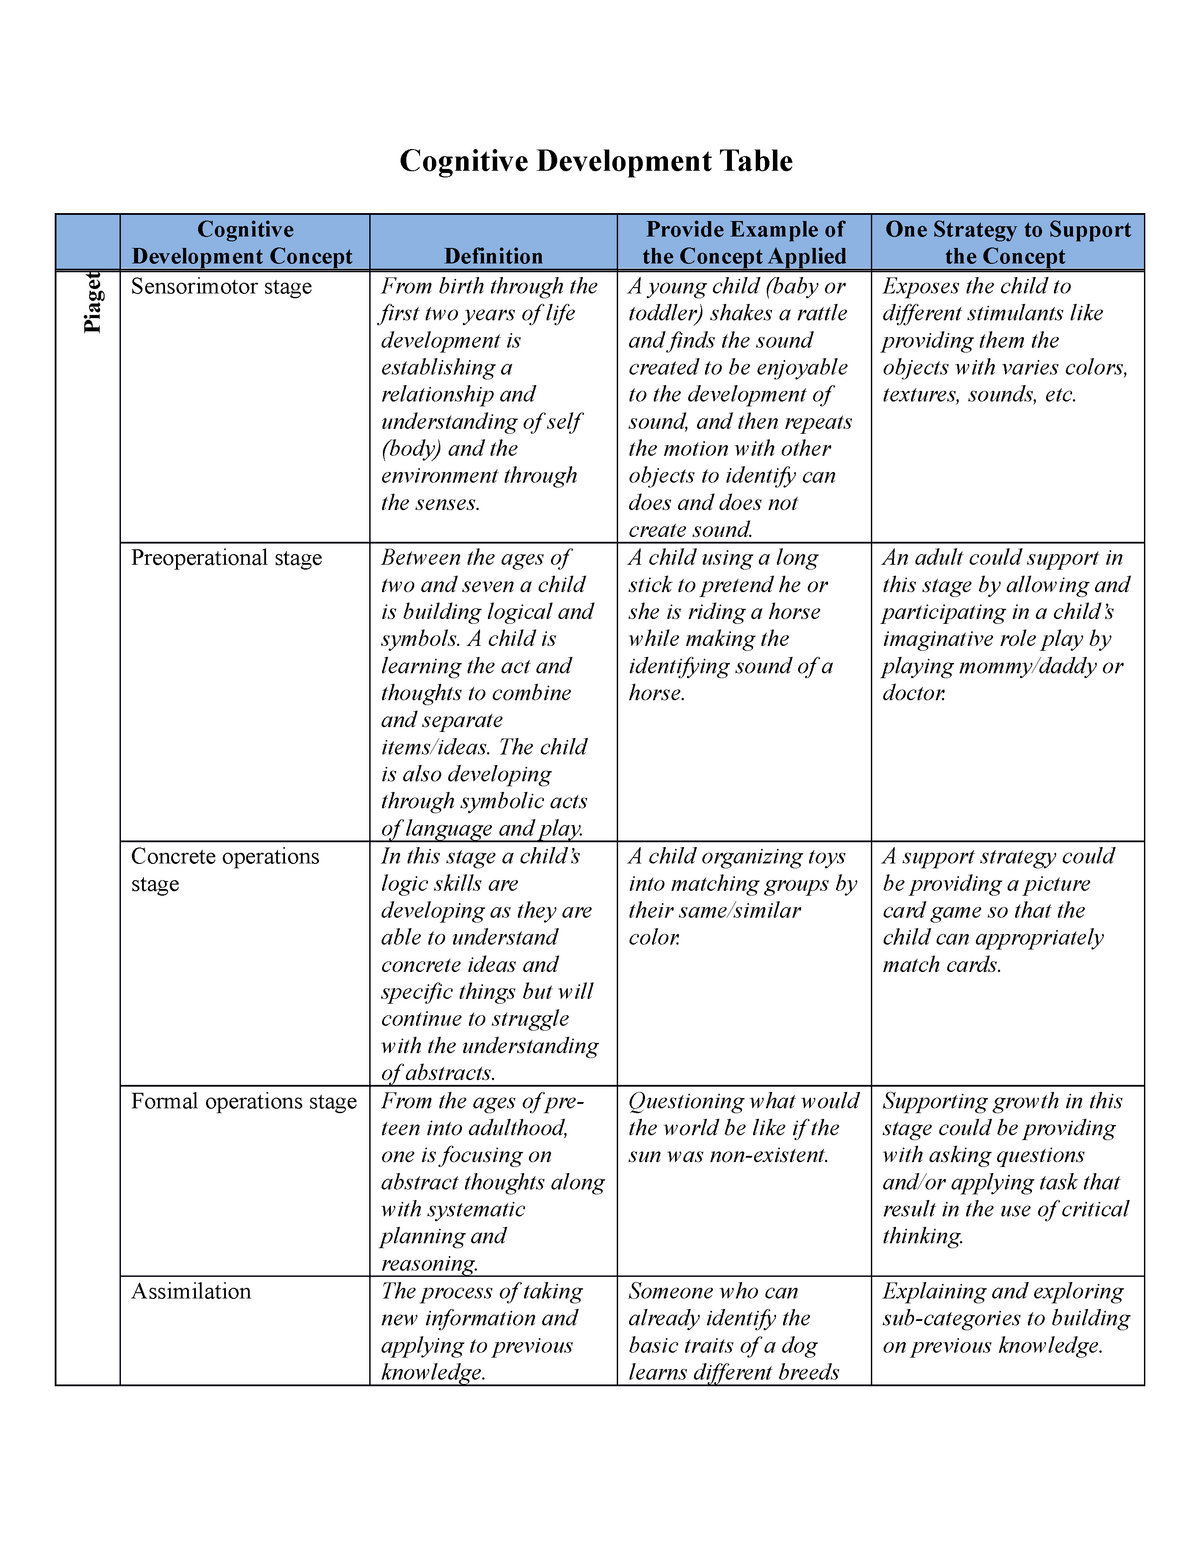 PPR Cheat Sheet.pdf - PIAGET'S THEORY OF COGNITIVE DEVELOPMENT